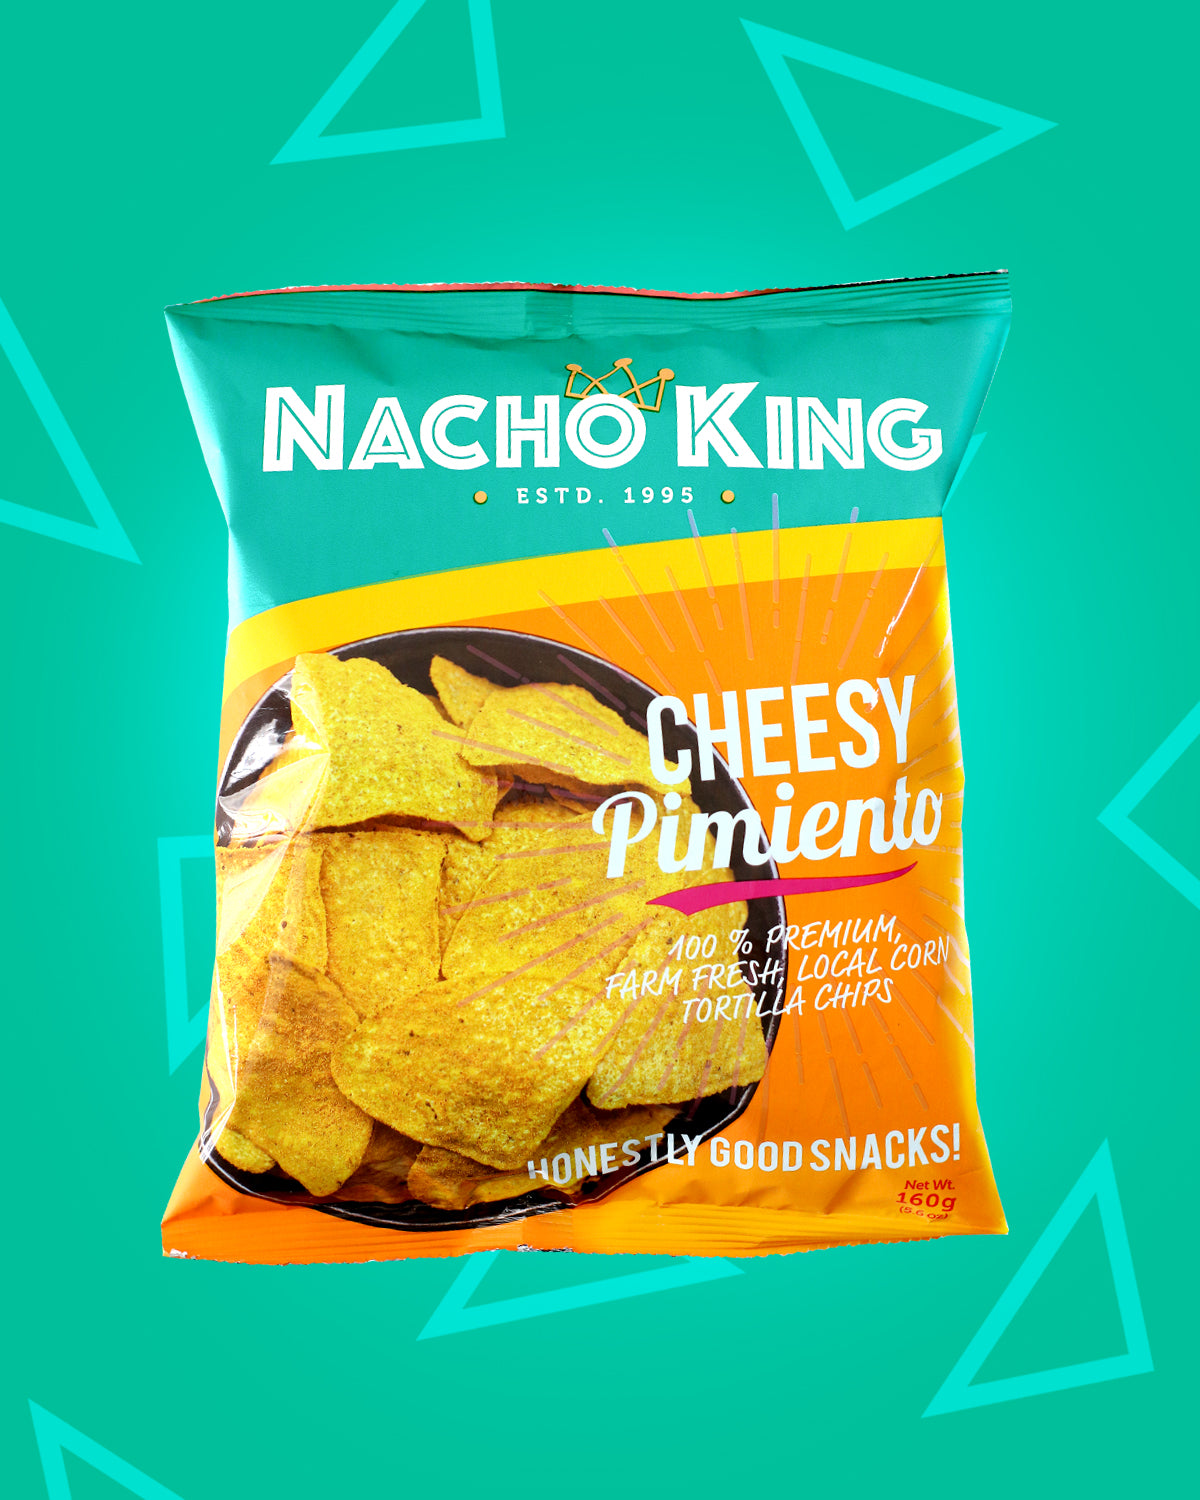 A pack of Nacho King Cheesy Pimiento Tortilla Chips, Local Corn Chips